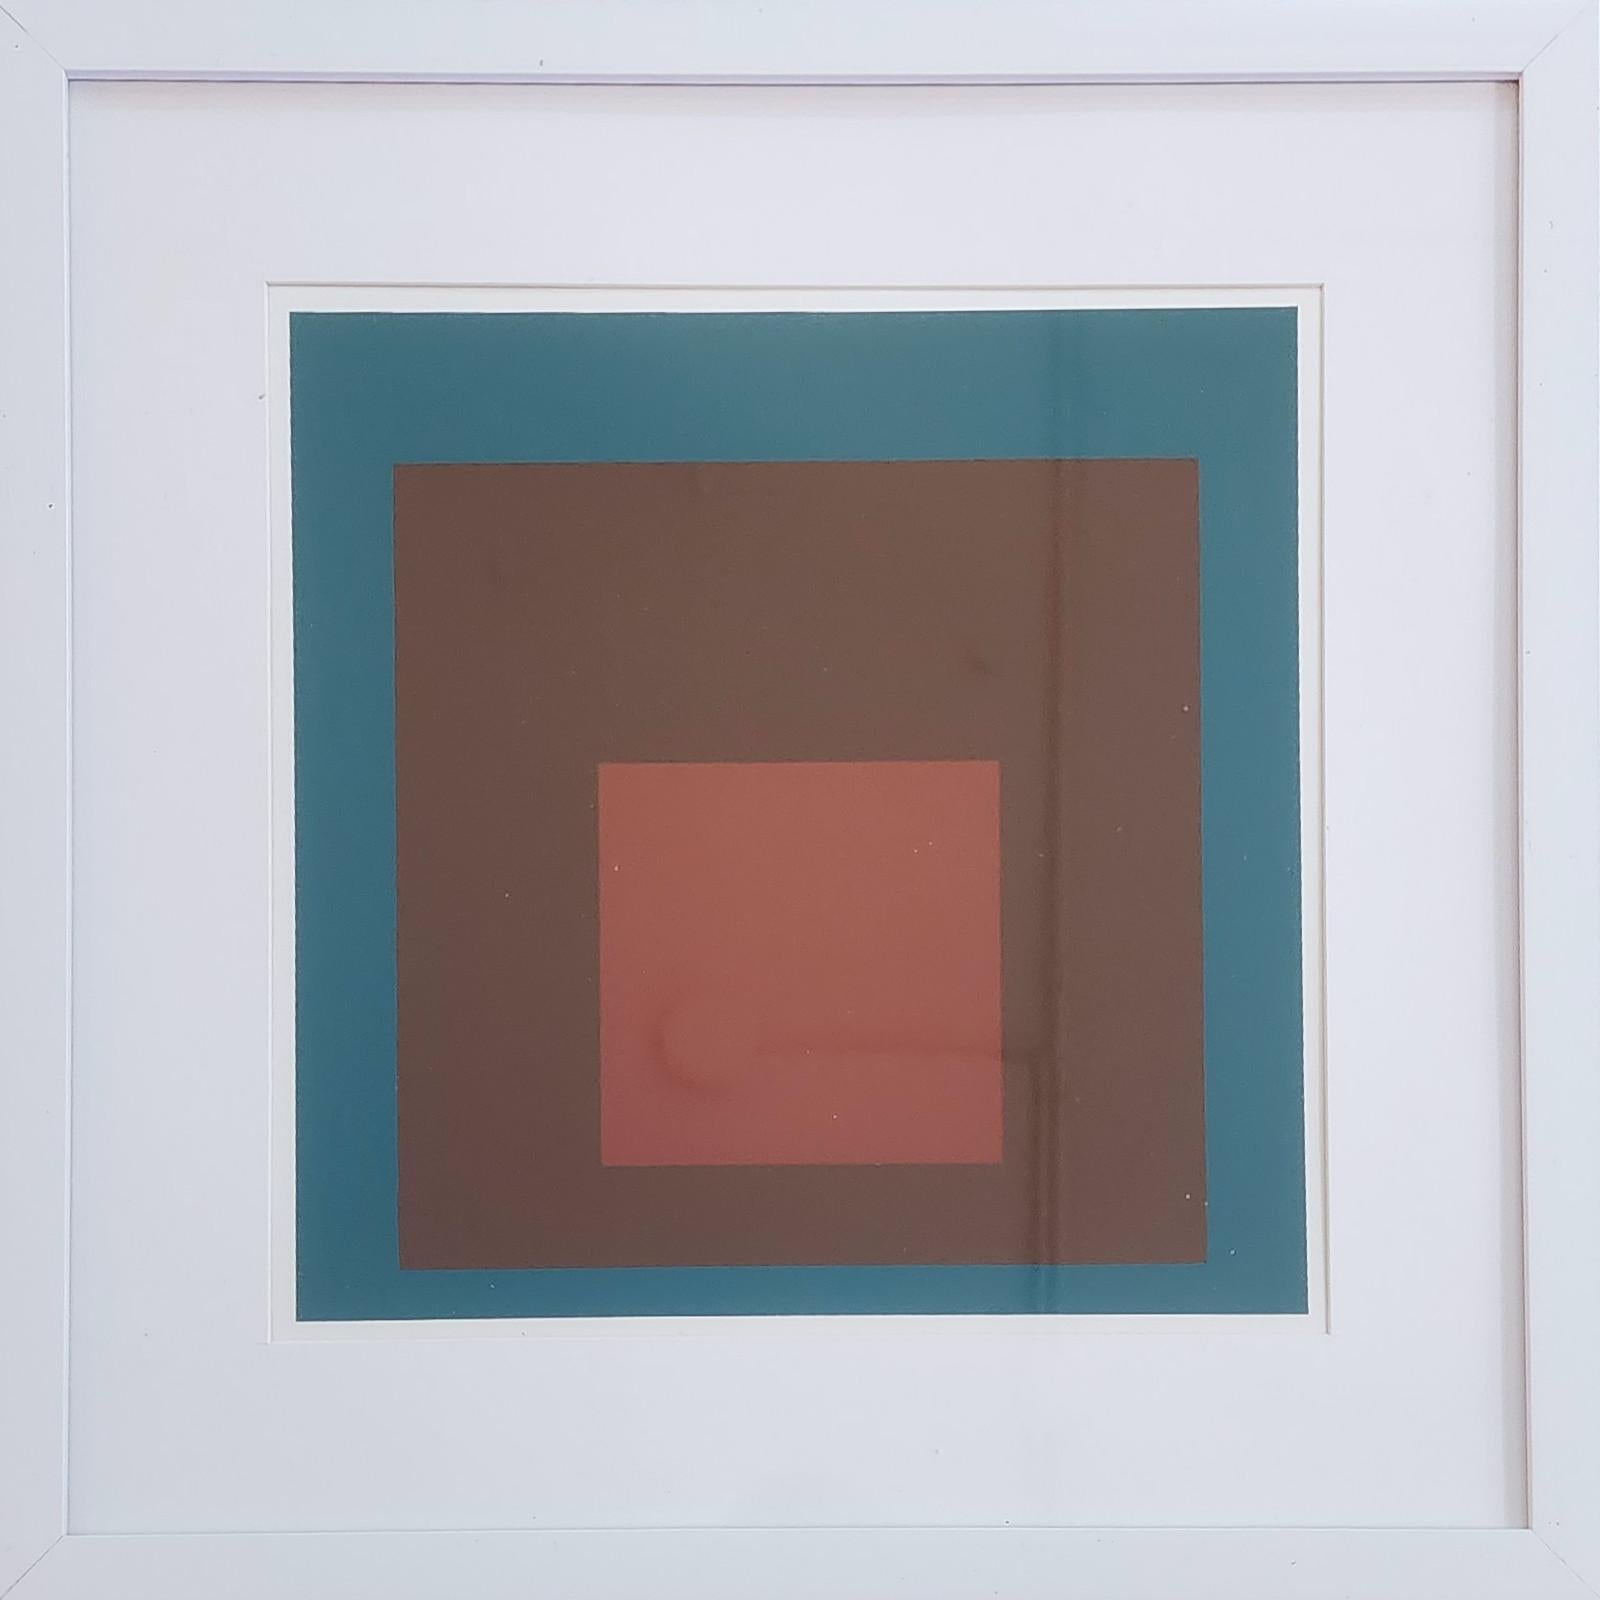 Homage to the Square: At Night (Bauhaus, Minimalism, 50% OFF LIST PRICE) - Print by (after) Josef Albers